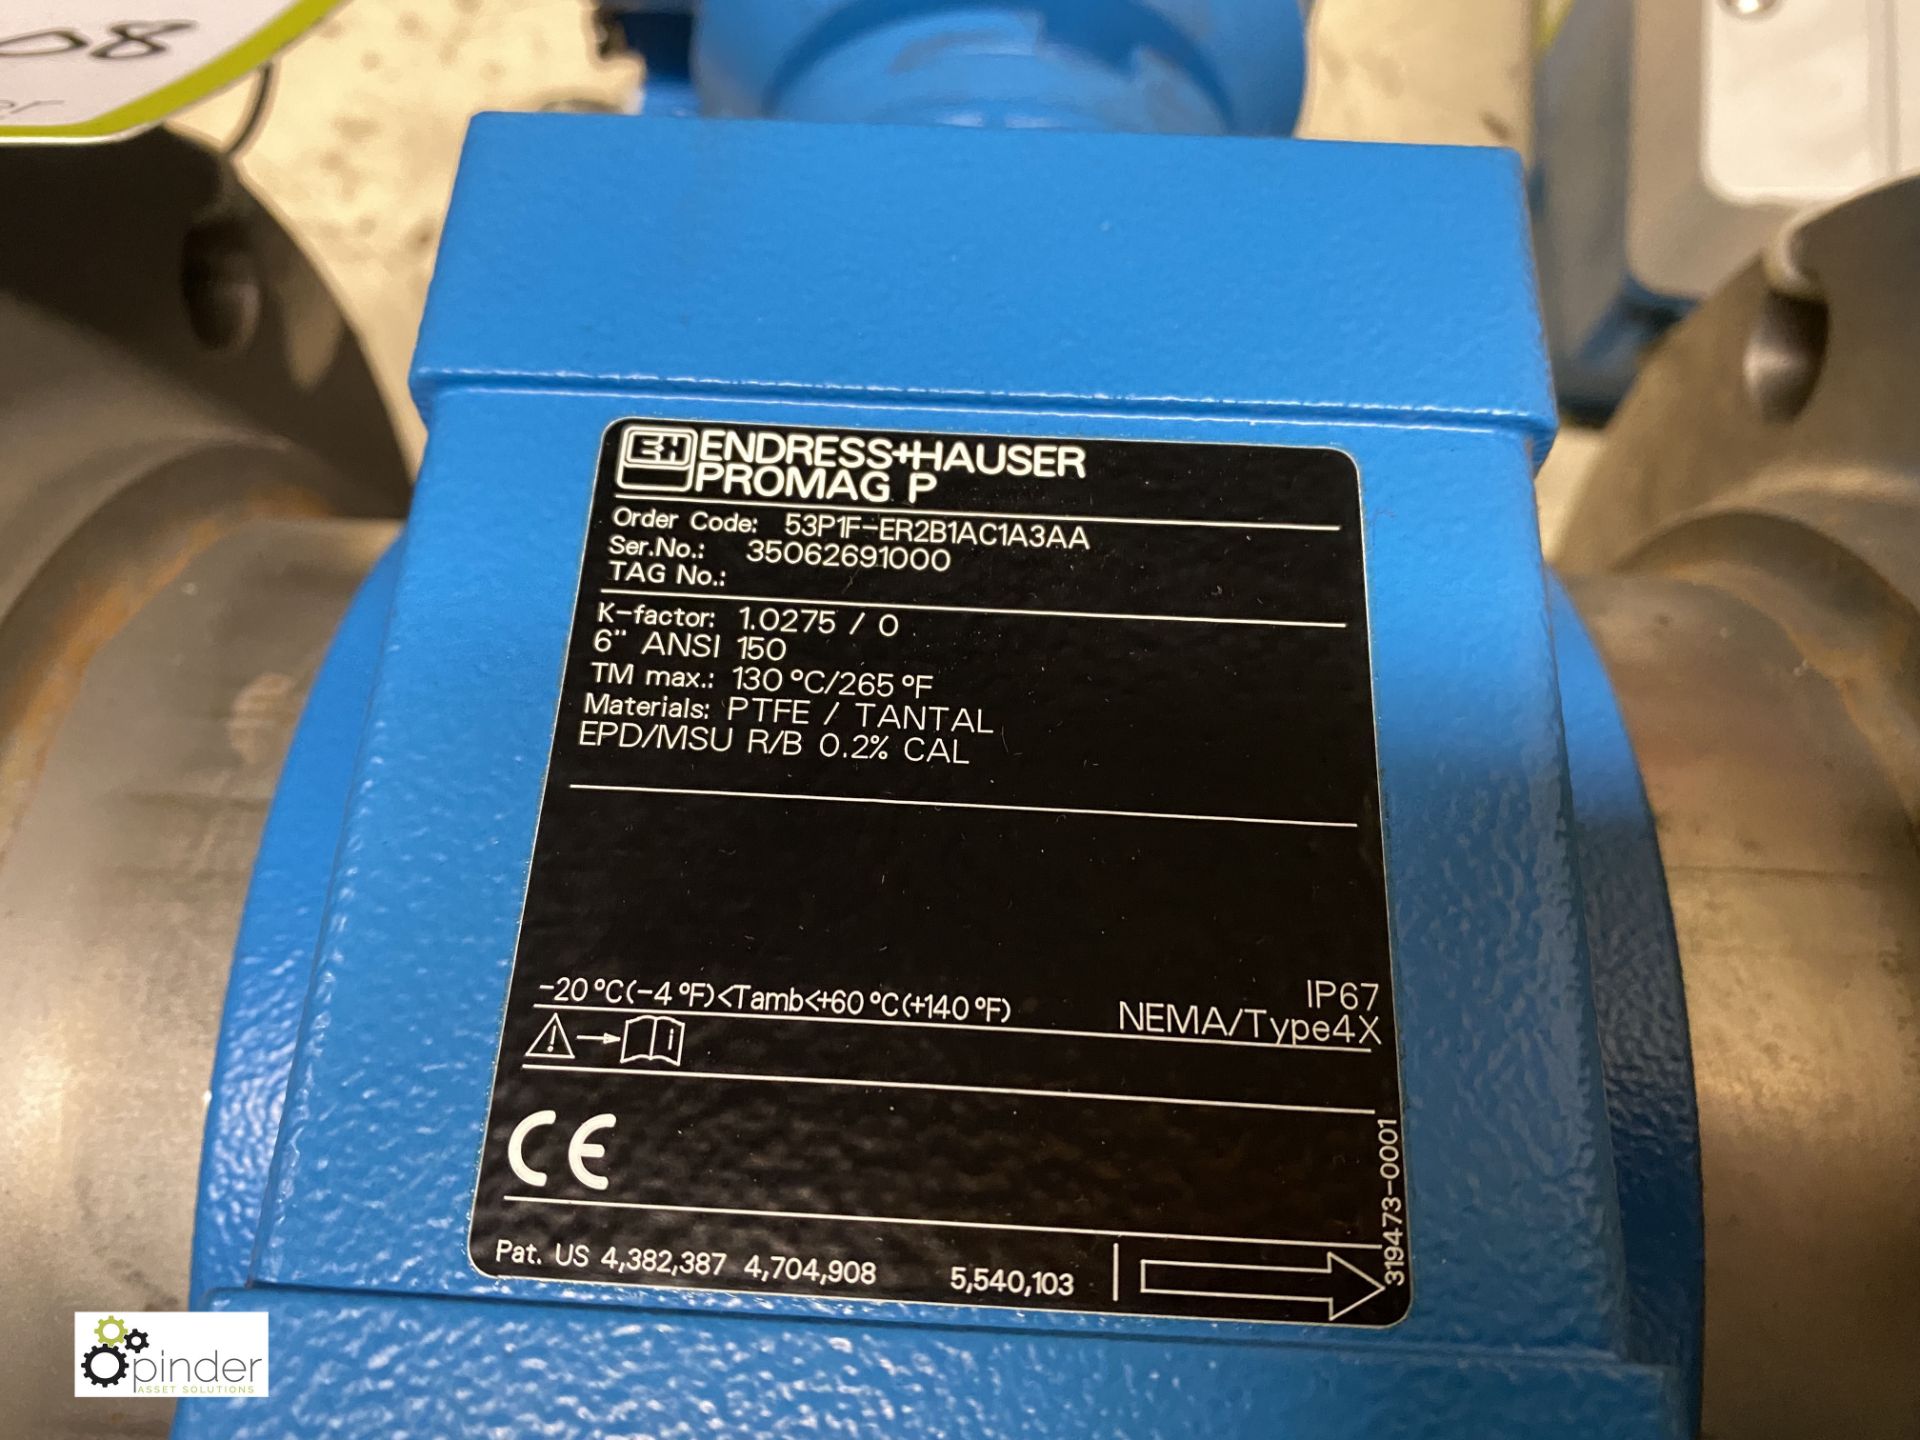 Endress & Hauser Promag P53 53P1F-ER2B1AC1A3AA, S/ - Image 3 of 5